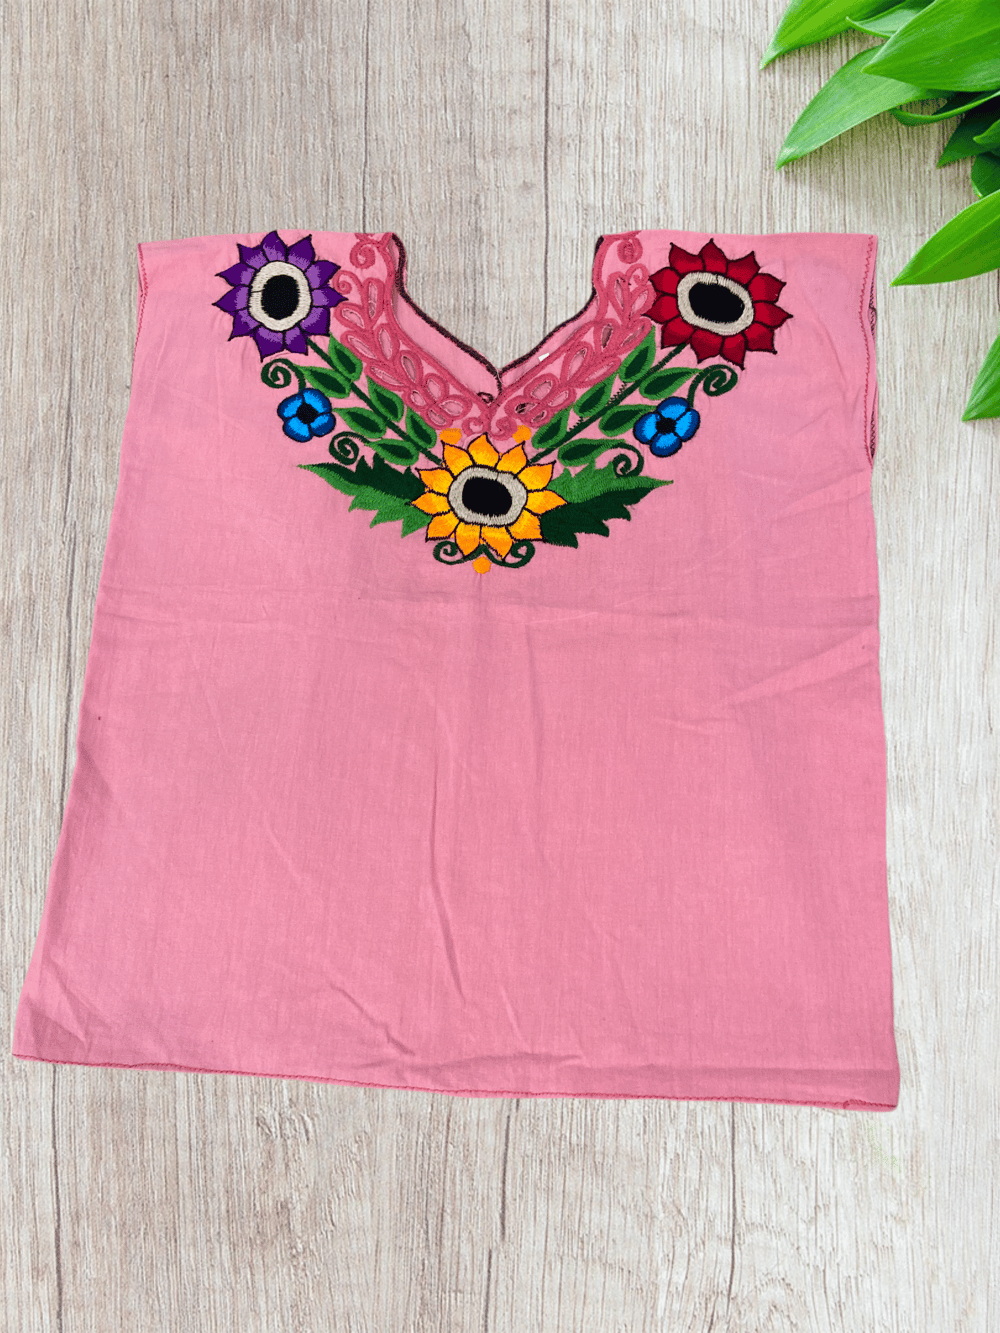 Embroidered Blusa- M